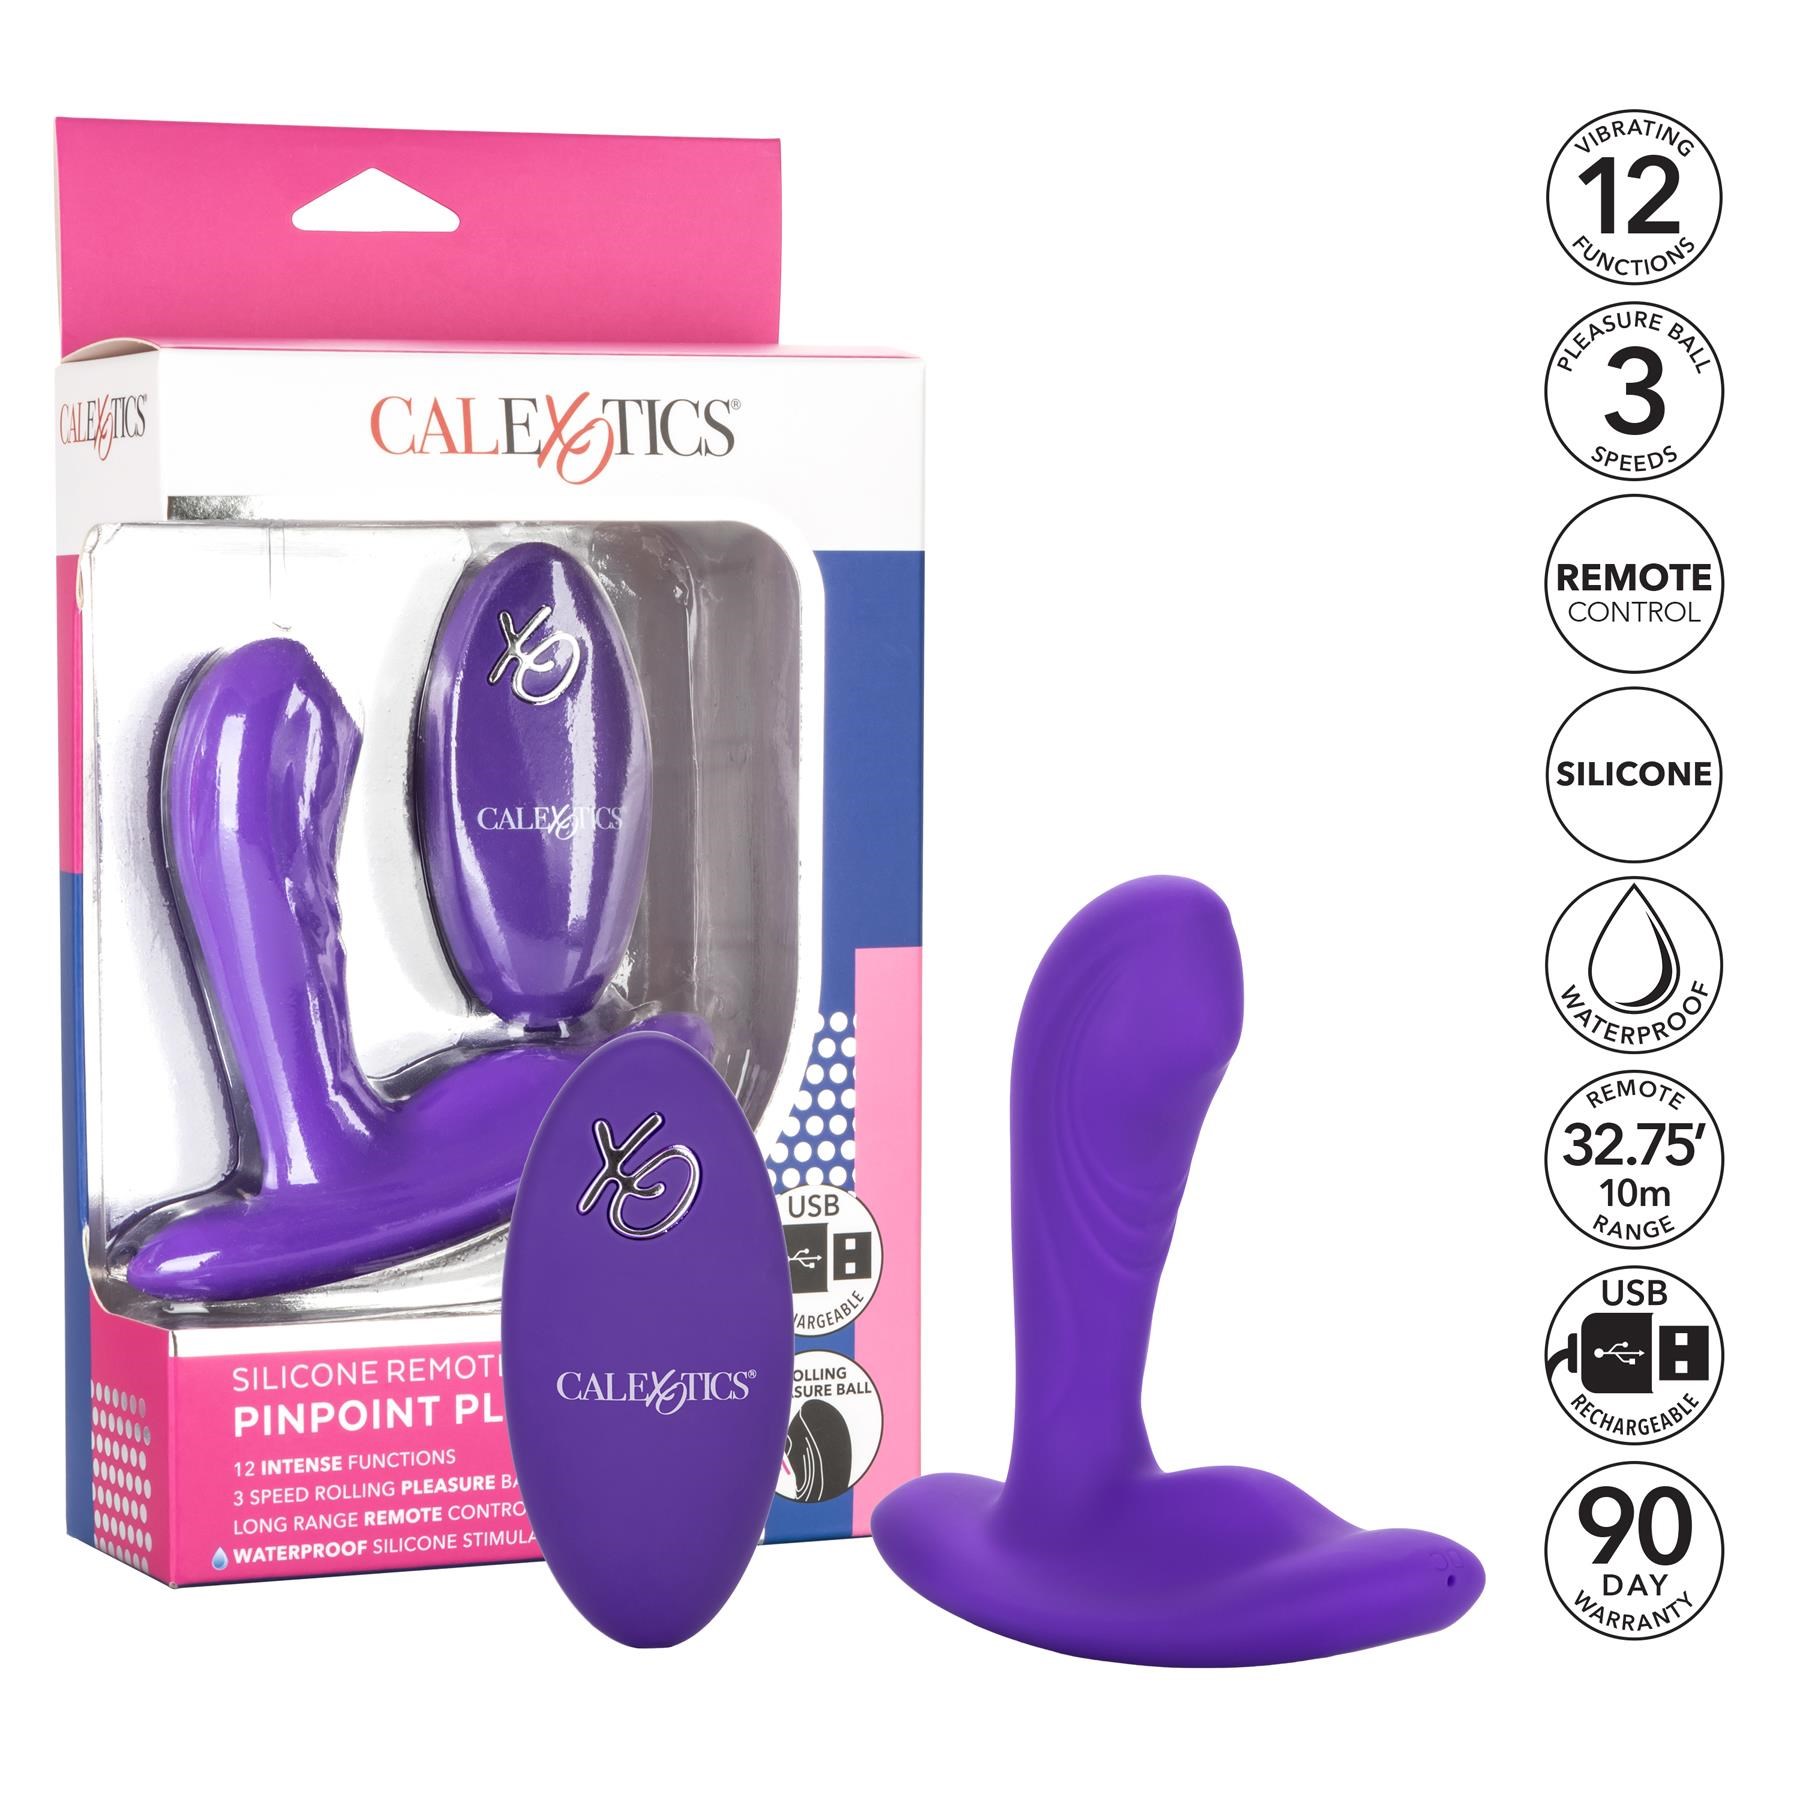 Silicone Remote Pinpoint Pleaser - Features